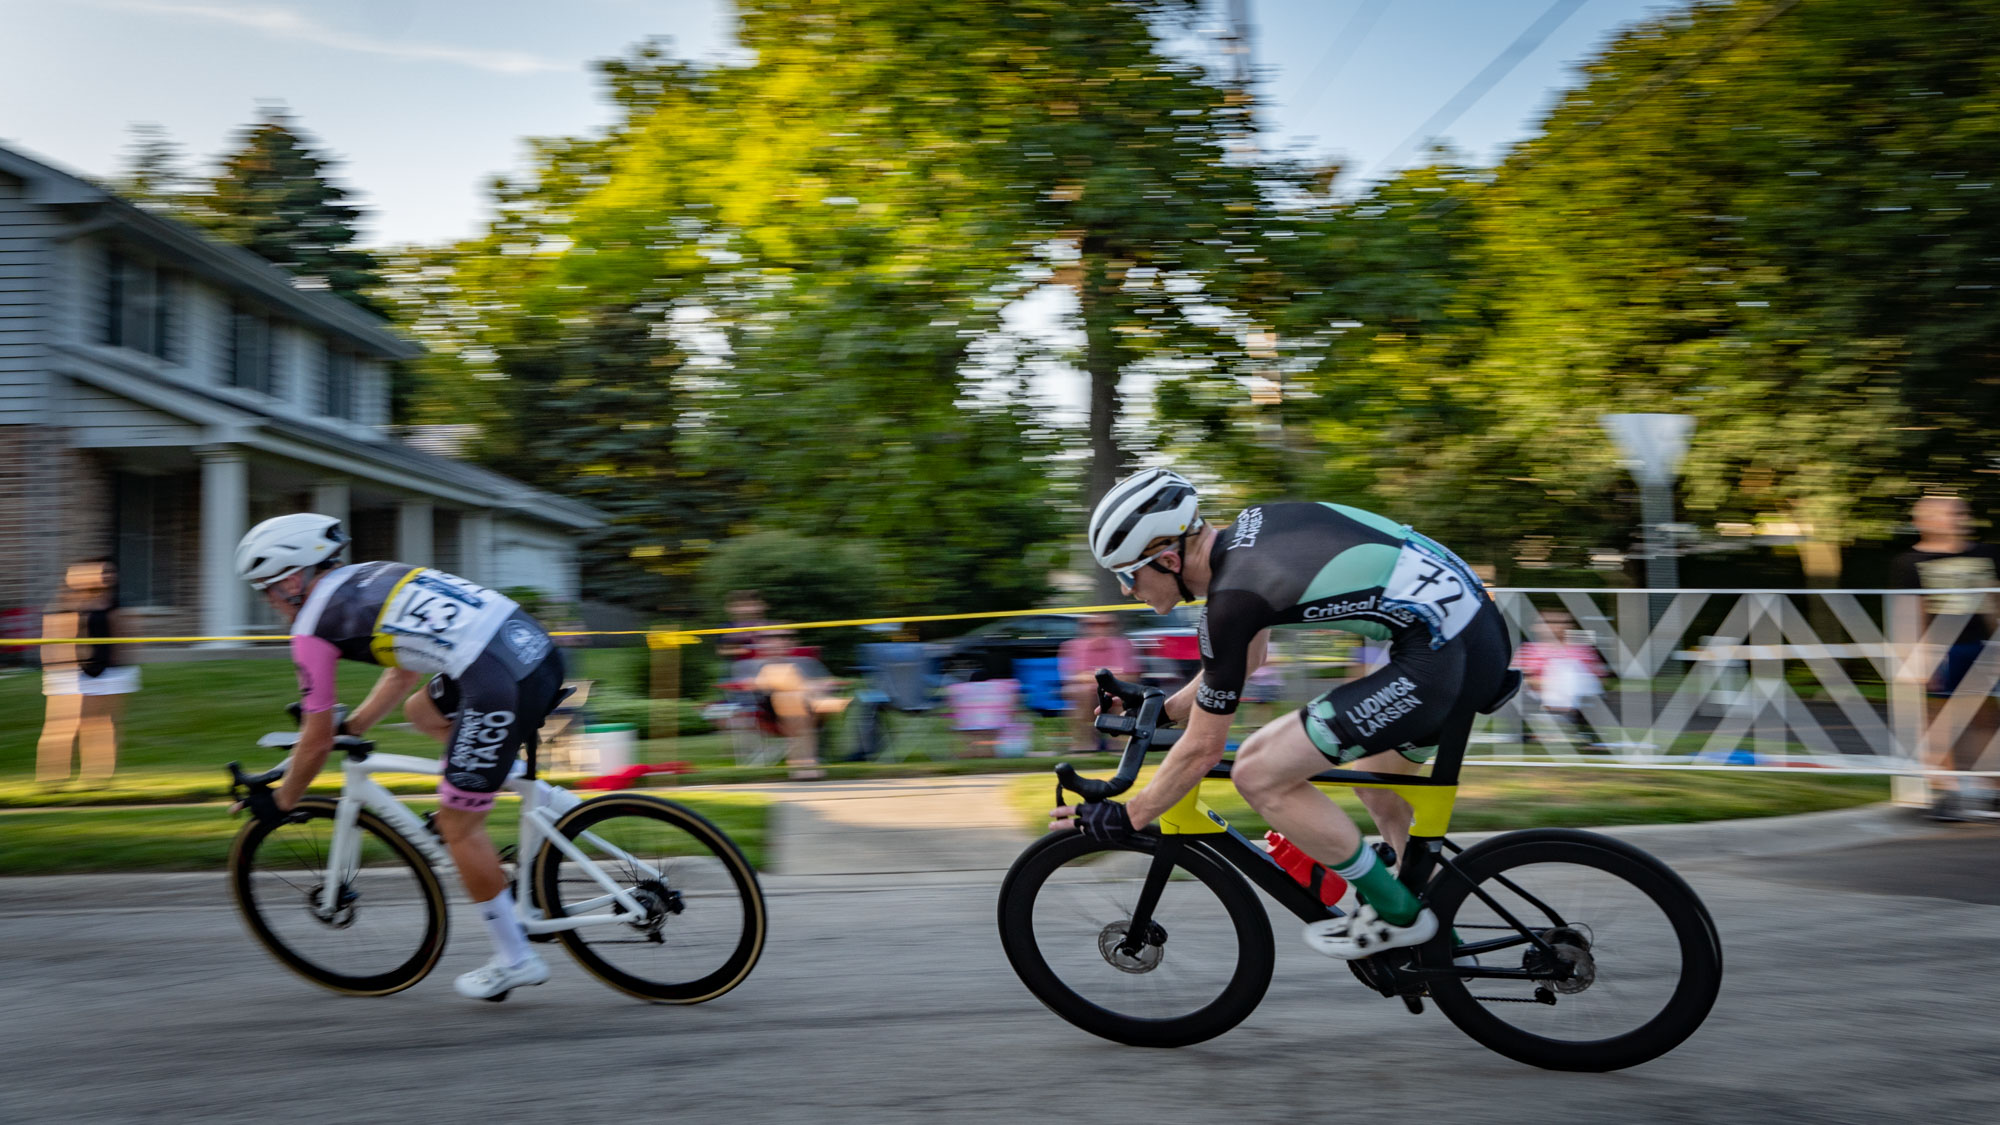 Cyclists at the race testing panning photography